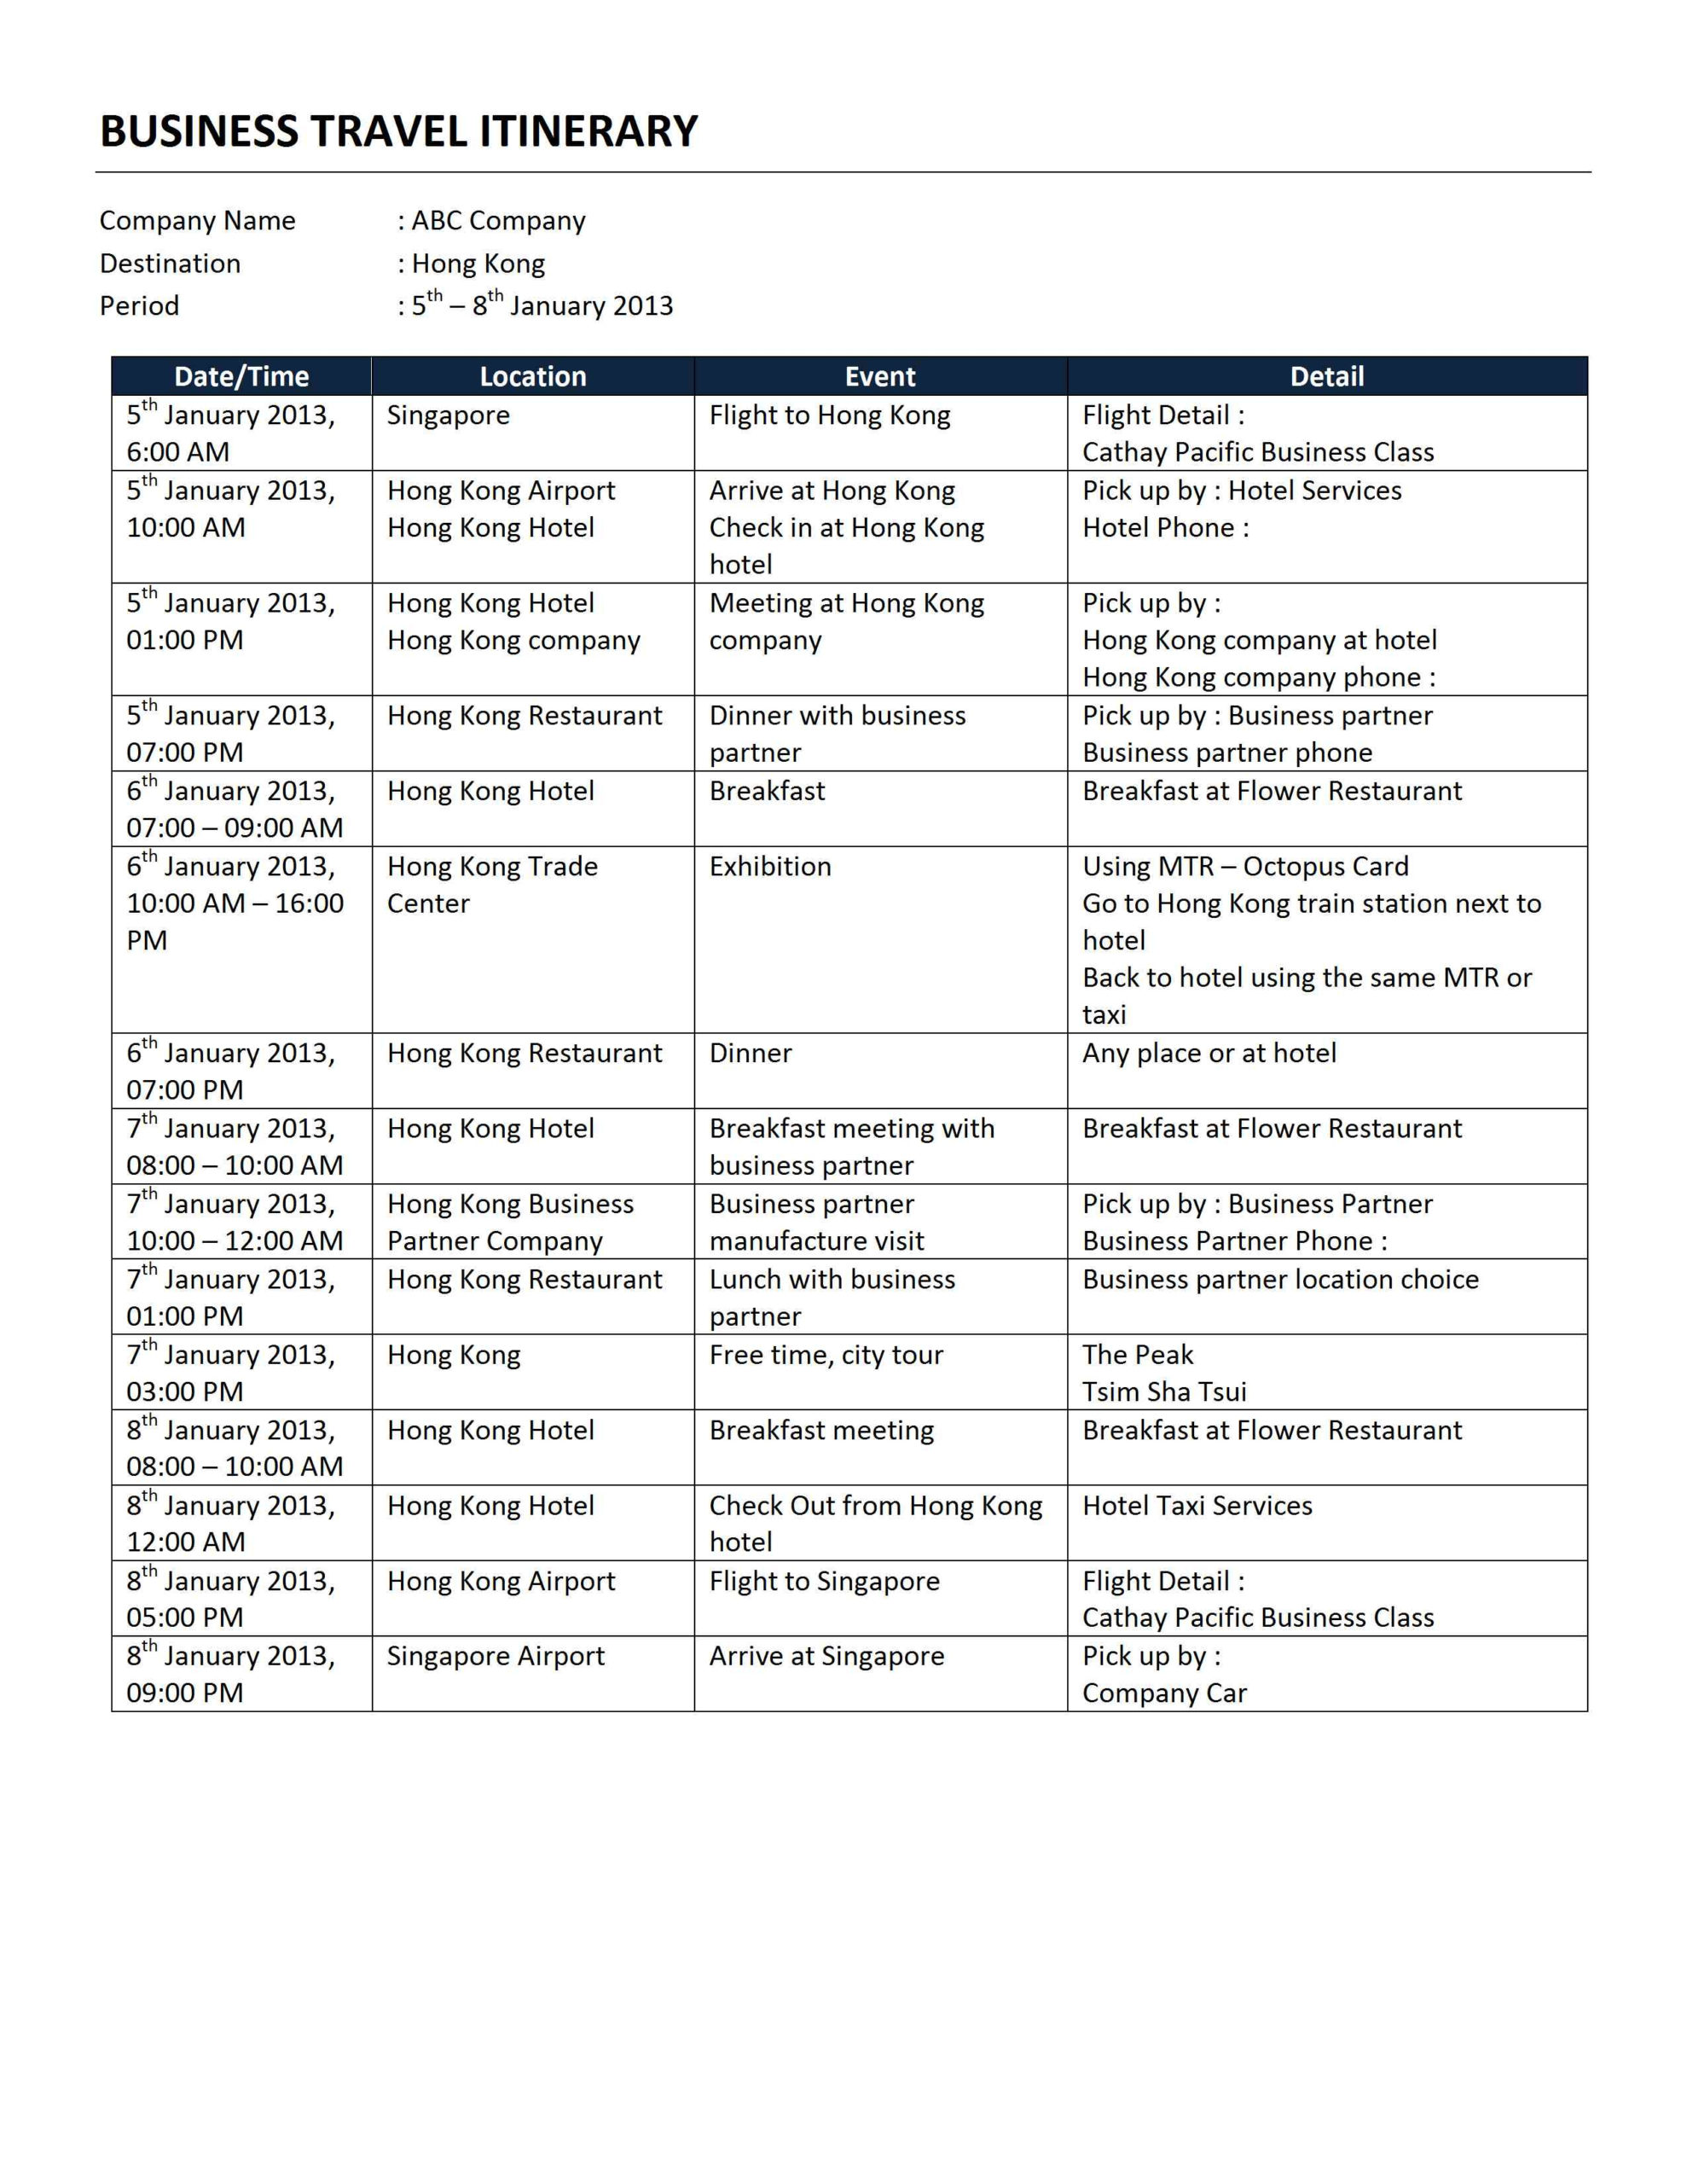 Business Travel Itinerary Template - Rendomi for Business Trip Itinerary Template